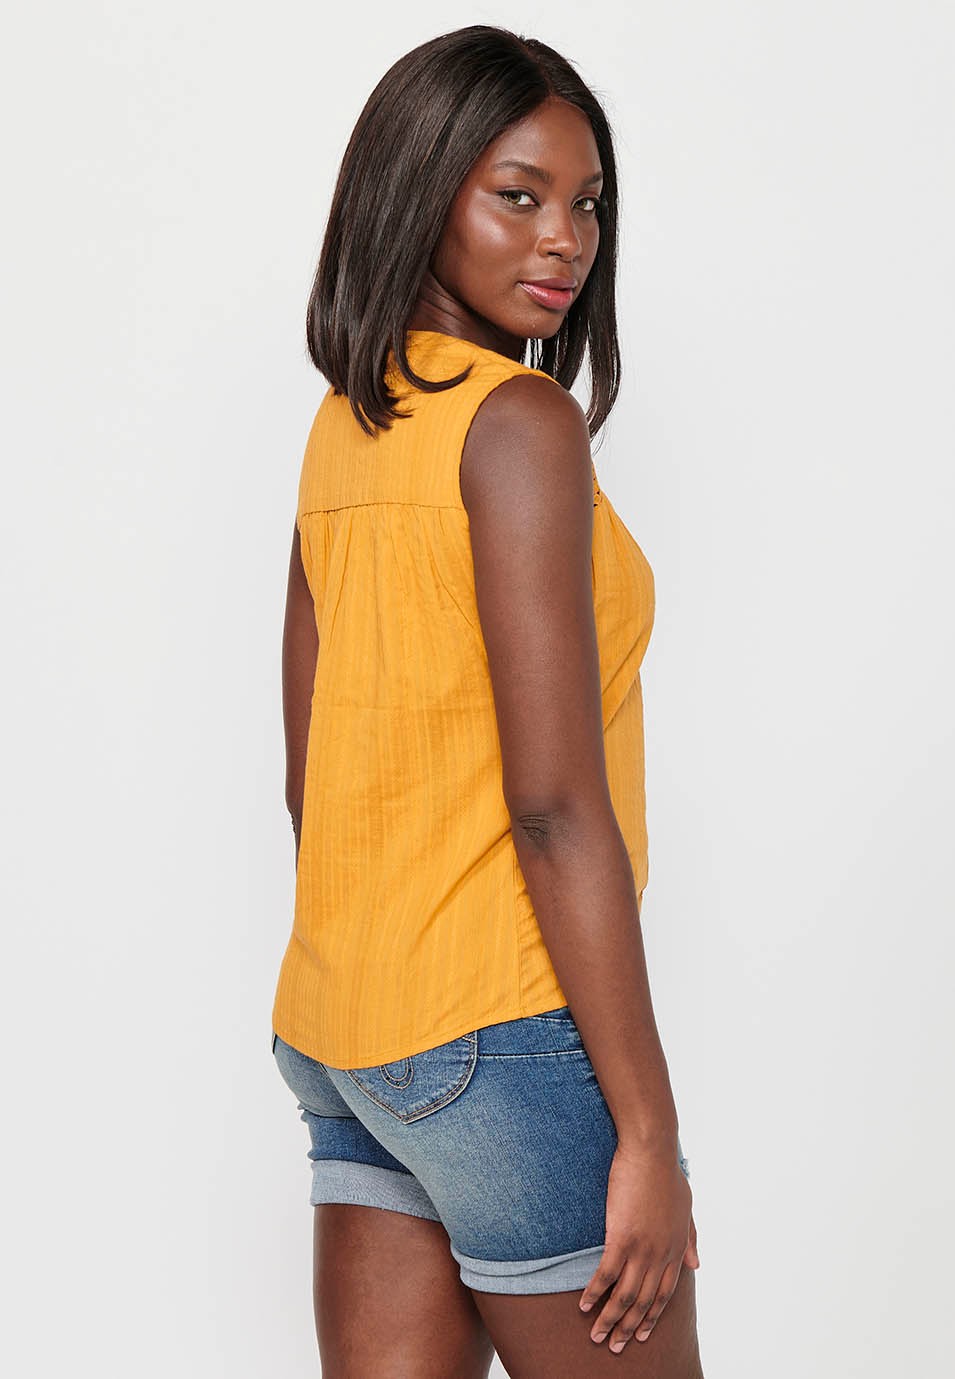 Sleeveless Cotton Blouse with Round Neck and Front Closure with Buttons and Embroidered Details in Mustard Color for Women 6